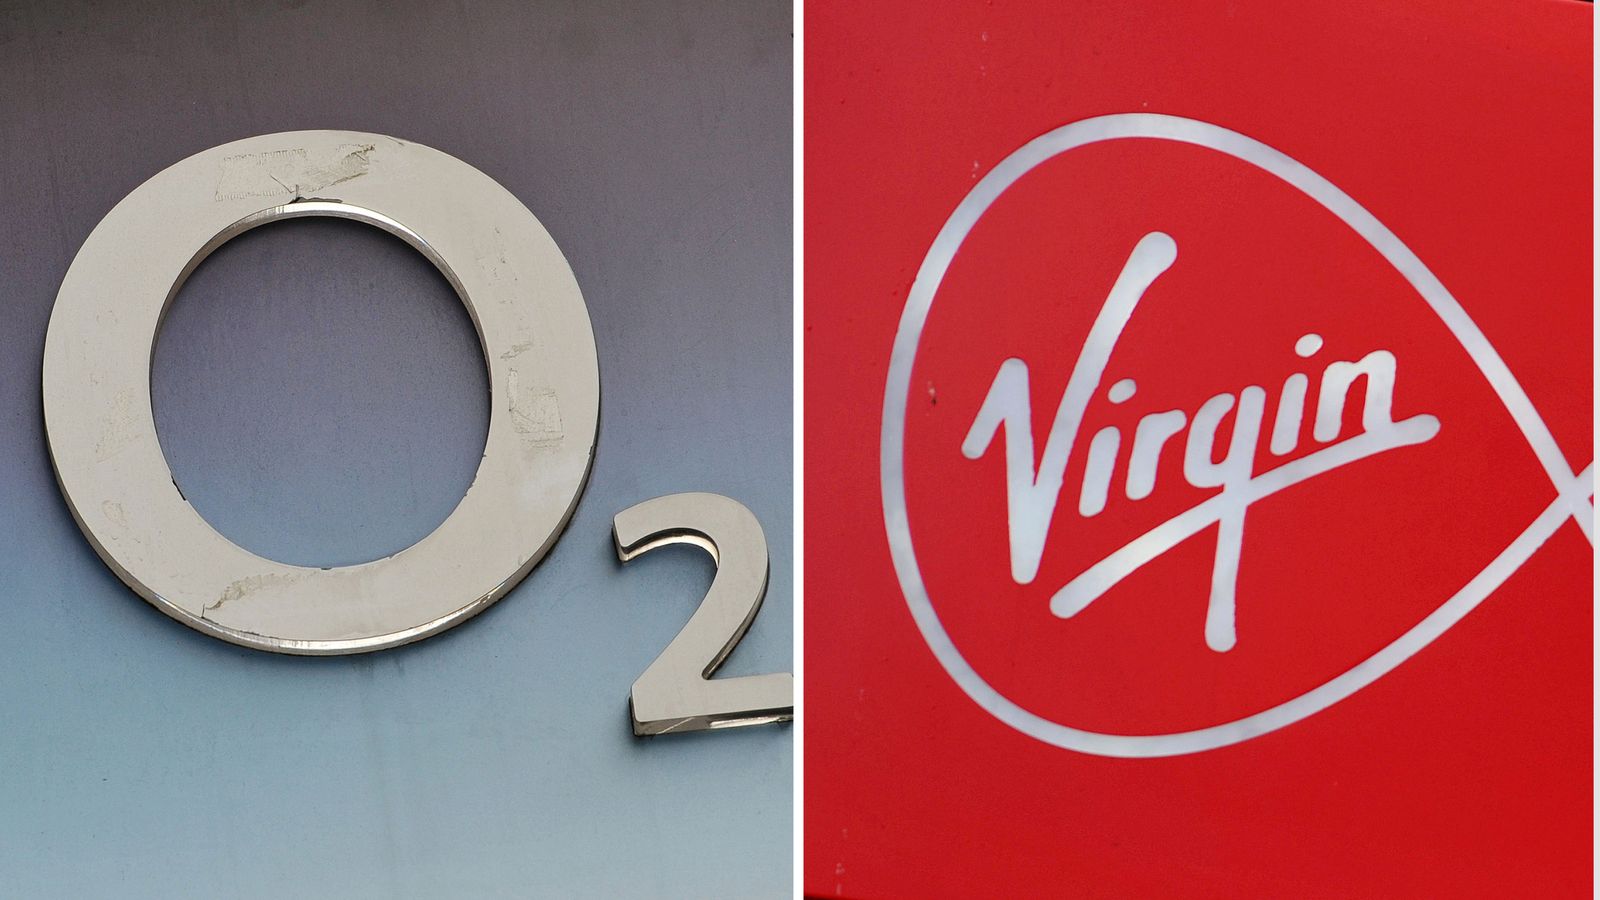 Virgin and O2 will not introduce mobile roaming charges this year for UK customers in EU